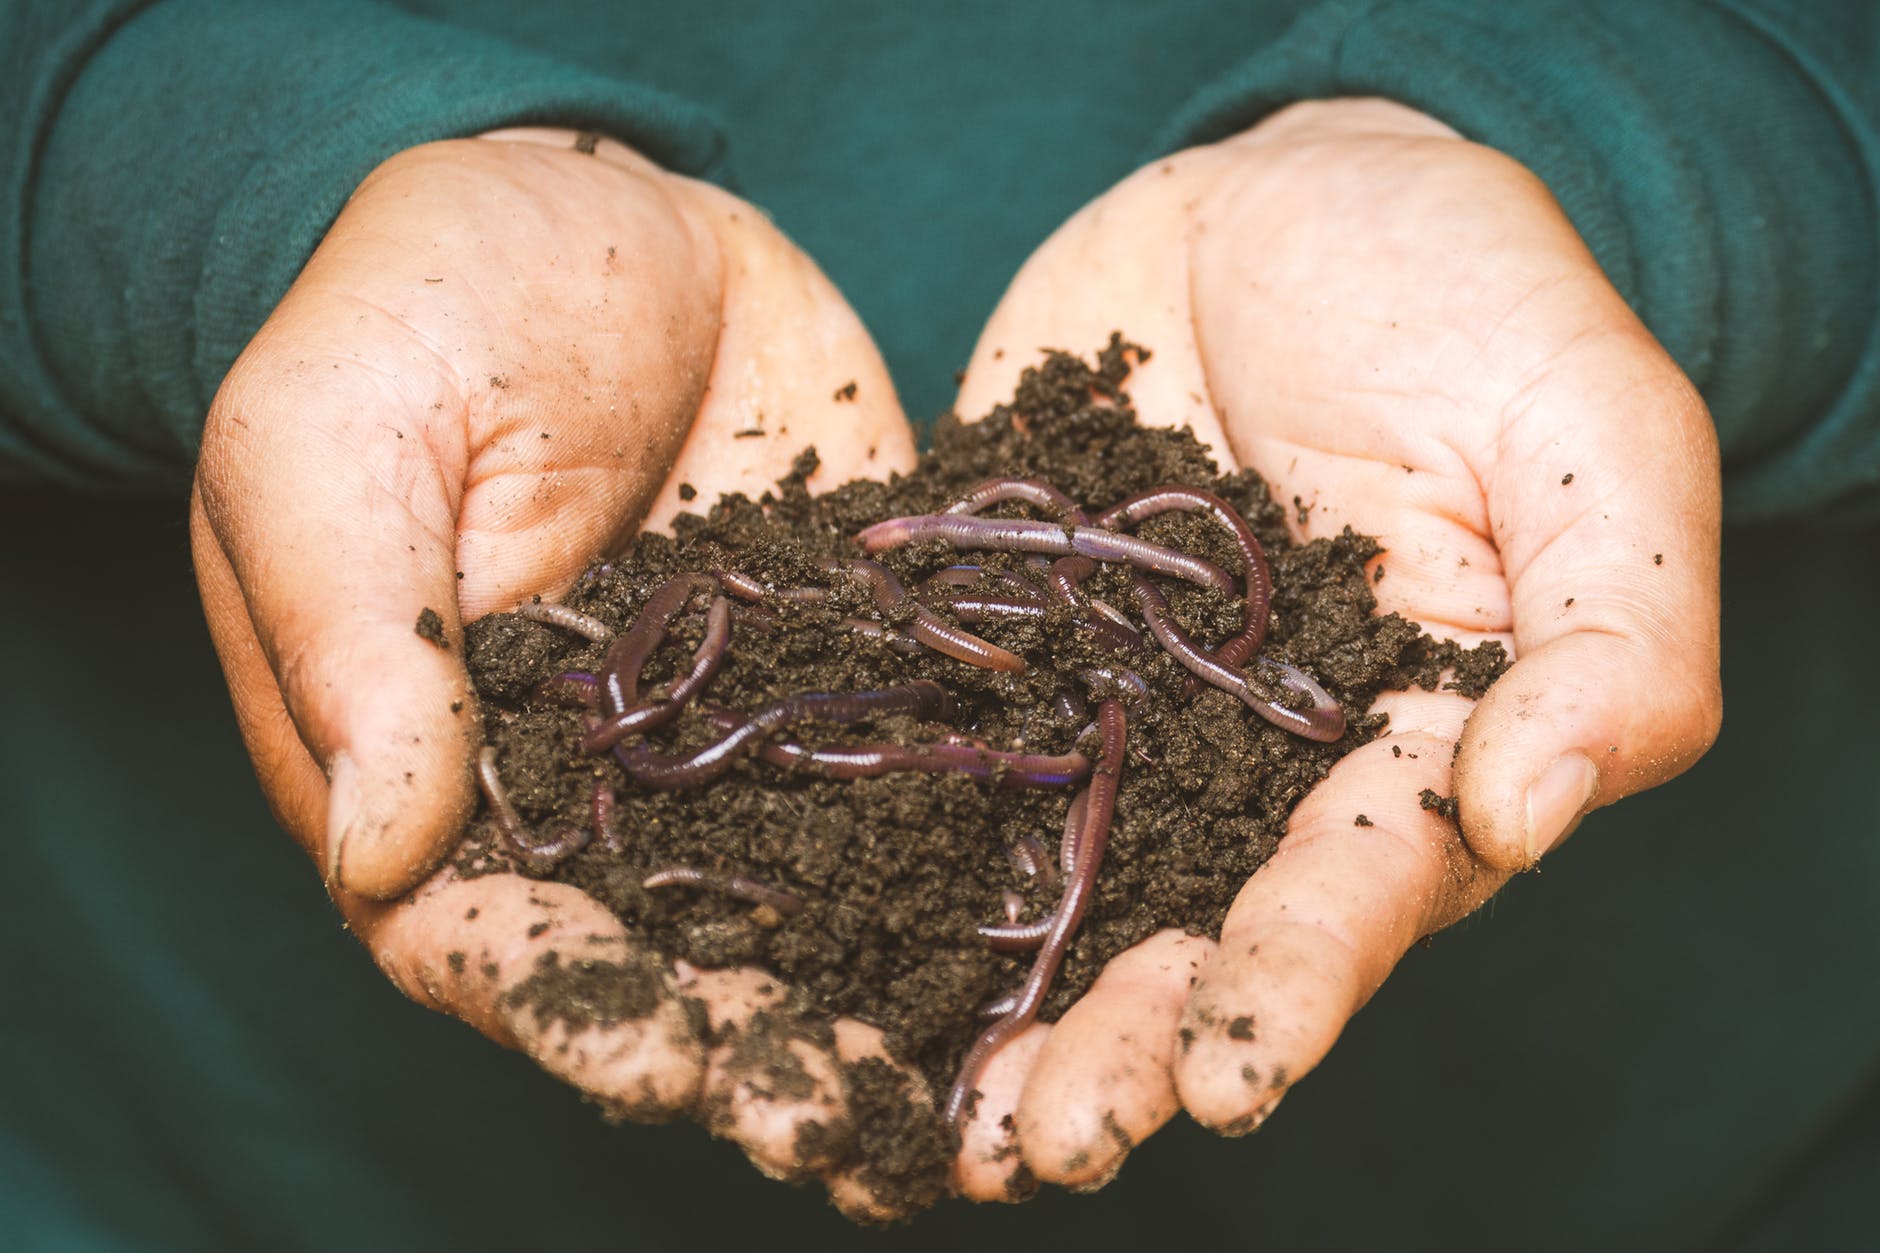 earthworms on a persons hand great food from home composting to help the earth and soil to help your sustainable new year resolutions